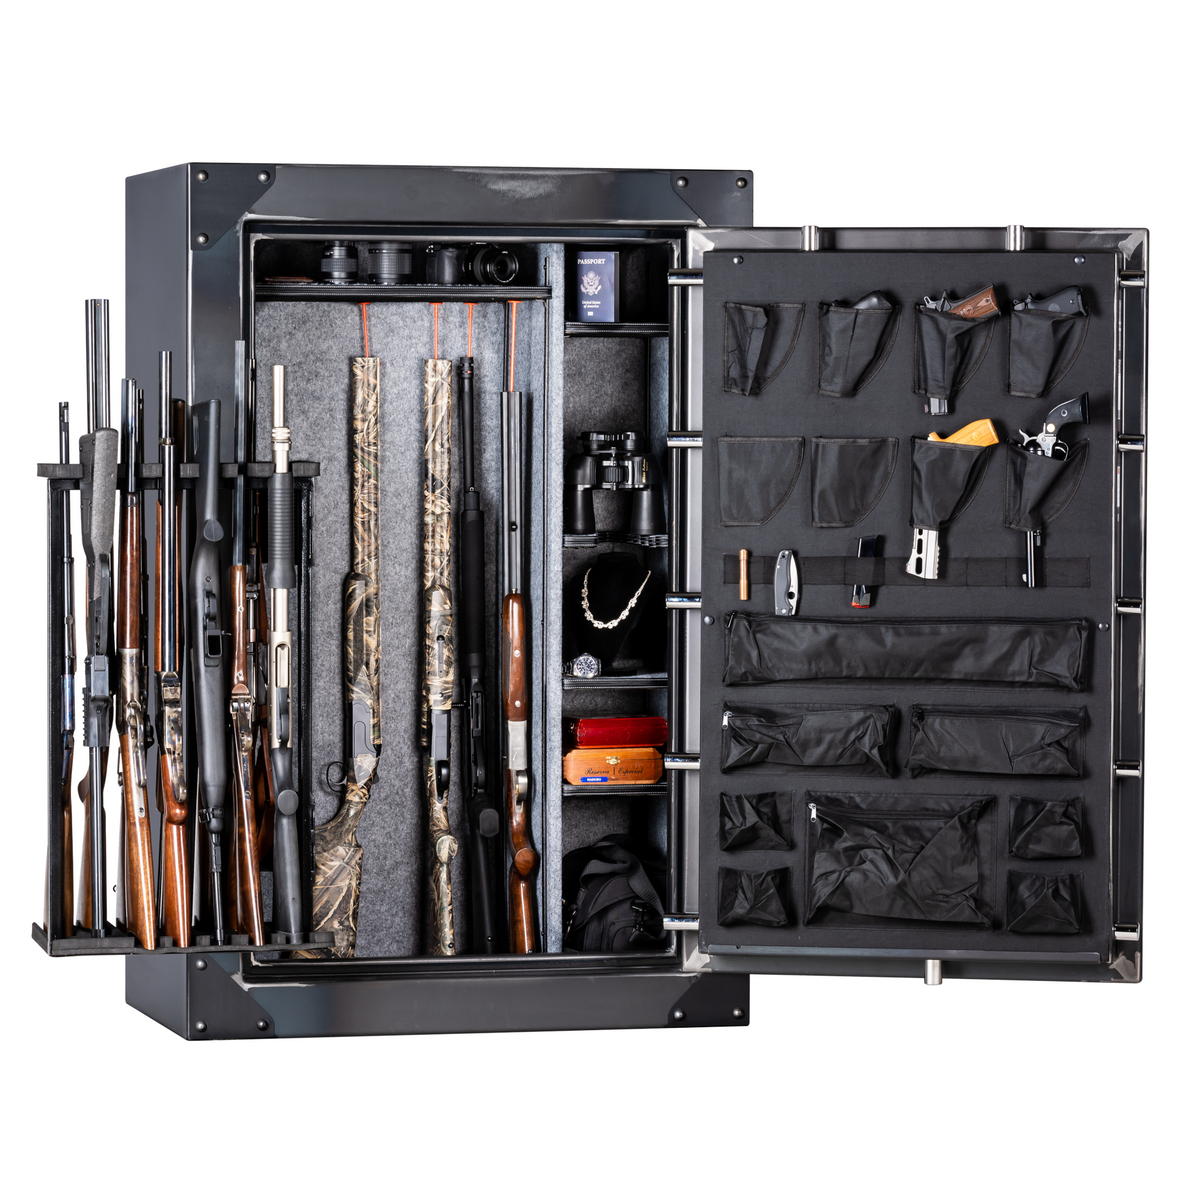 Rhino RSB6040EXSO Door Open at Full Swing and Swing Out Gun Rack at Full Swing